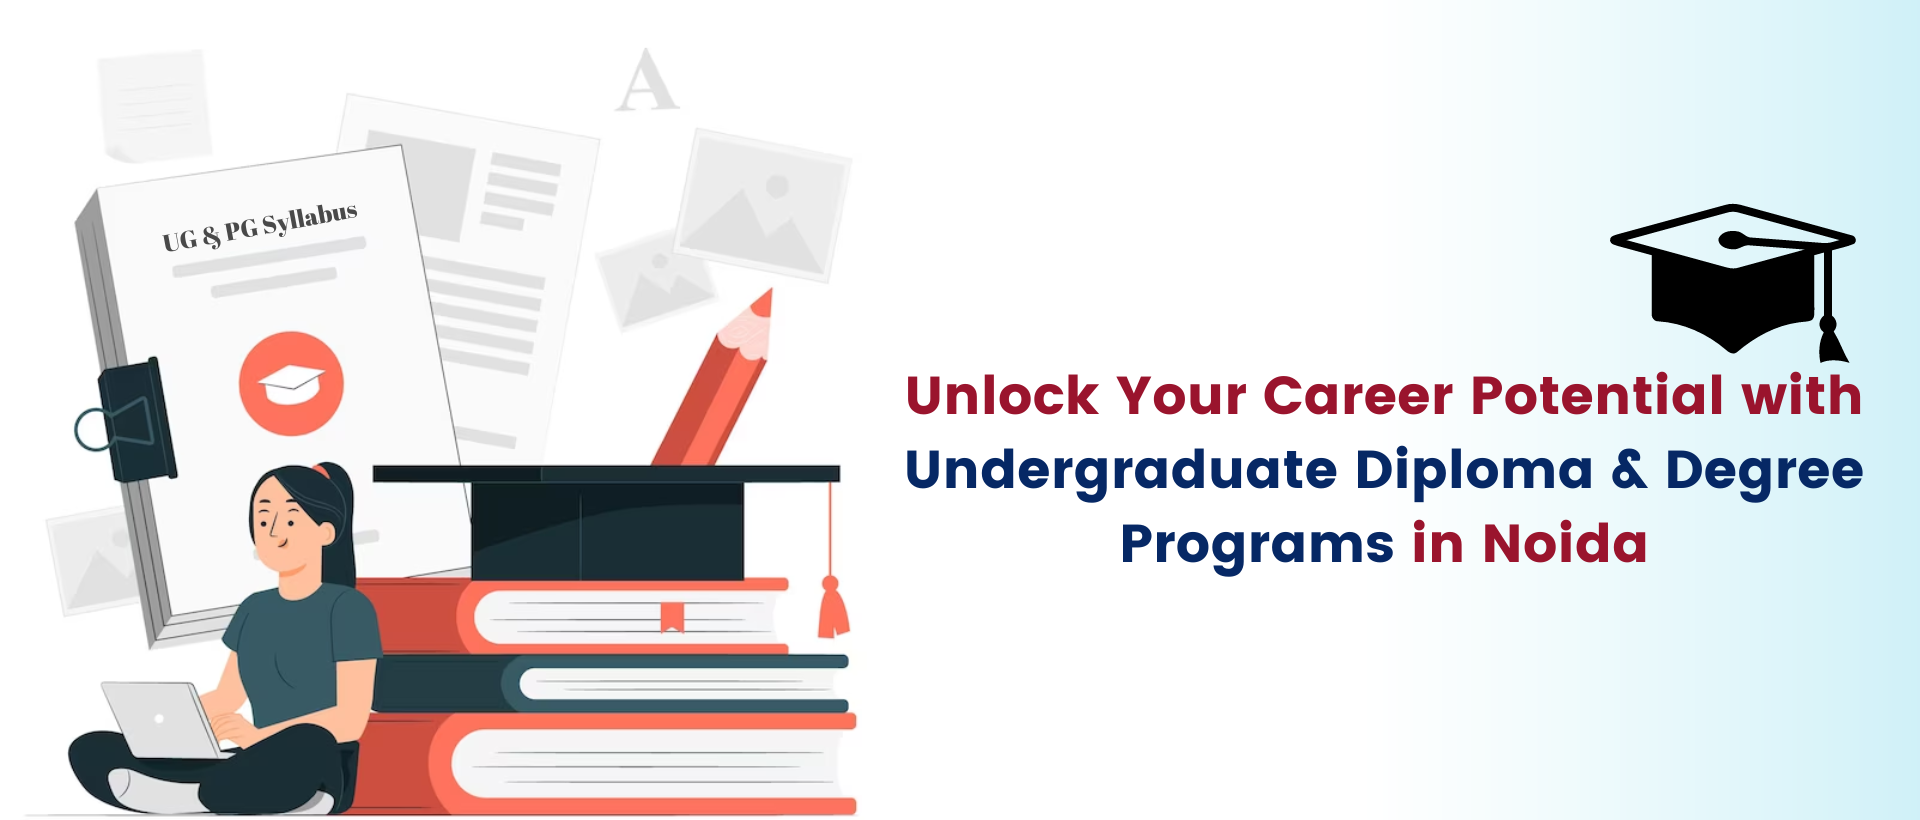 Unlock your career potential with undergraduate diploma & degree programs in noida